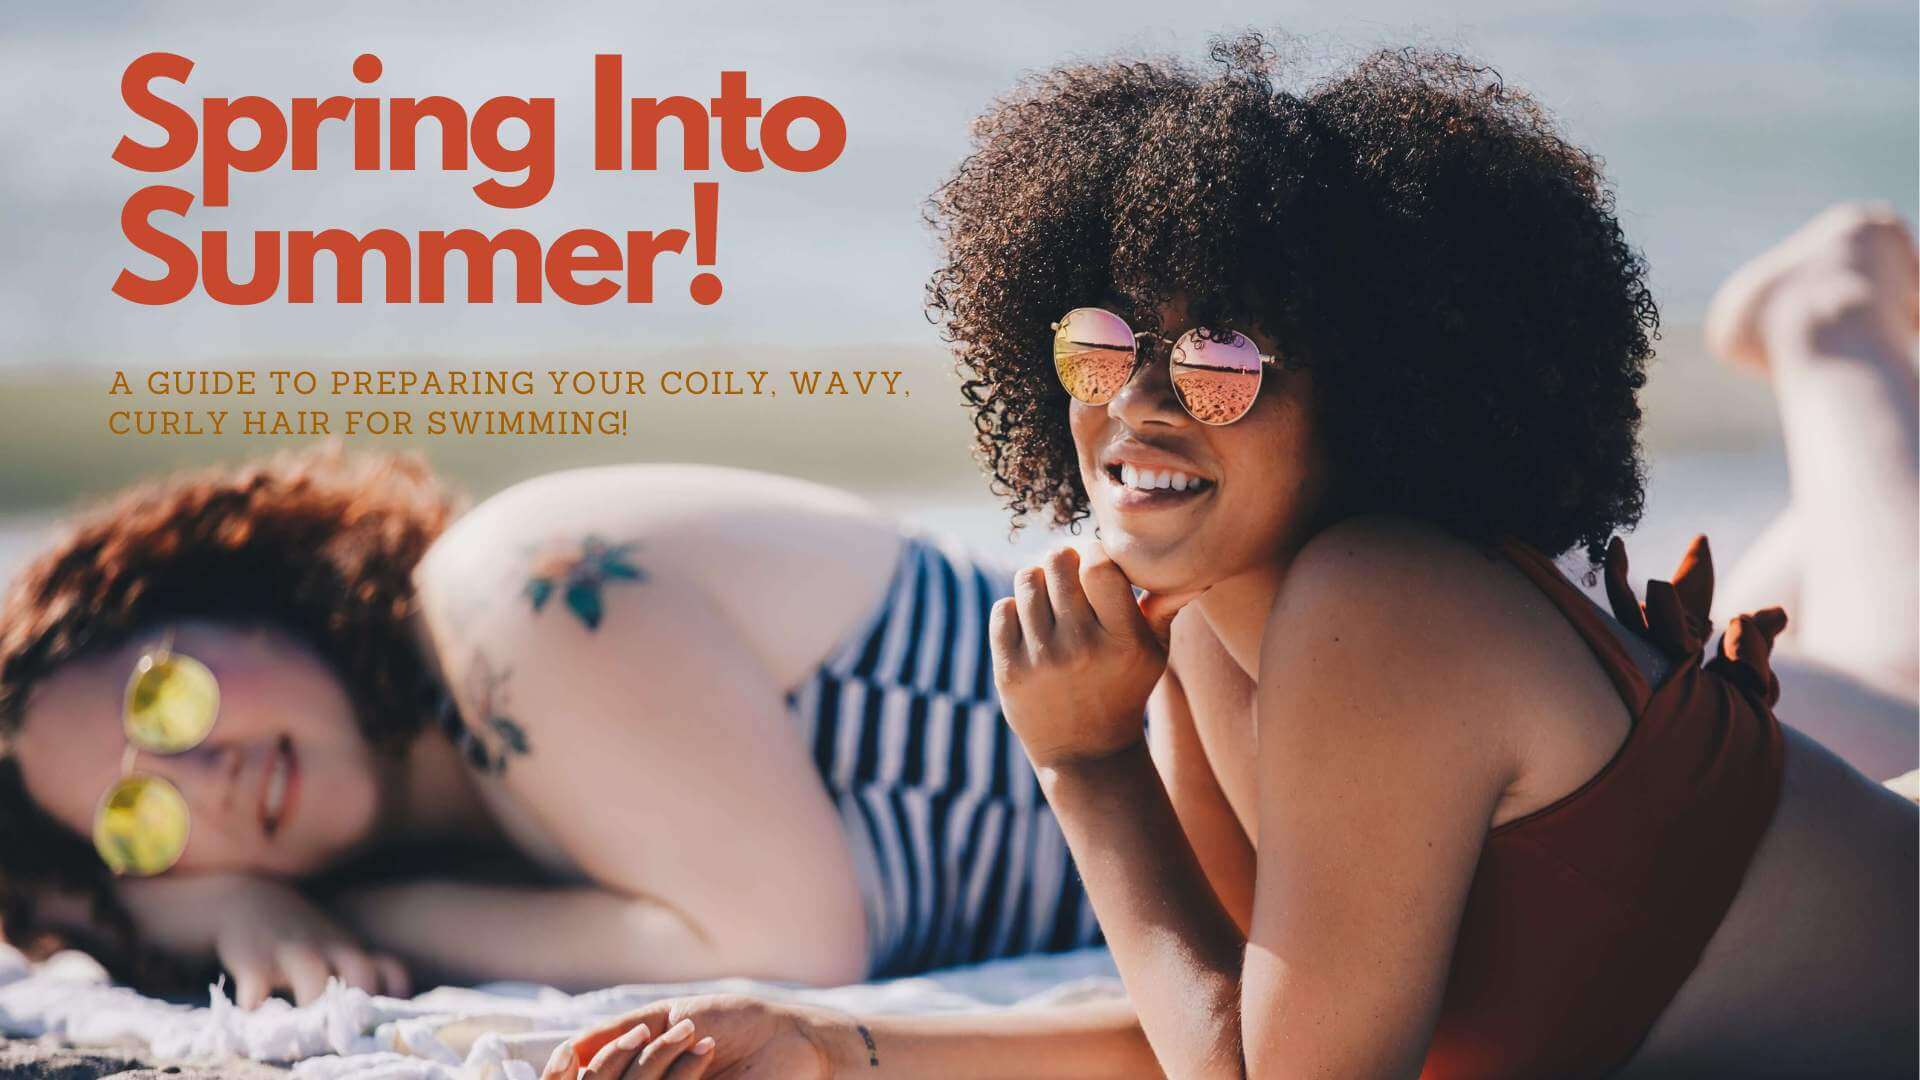 Spring Into Summer! A Guide to Preparing Your Coily, Wavy, Curly Hair for Swimming!